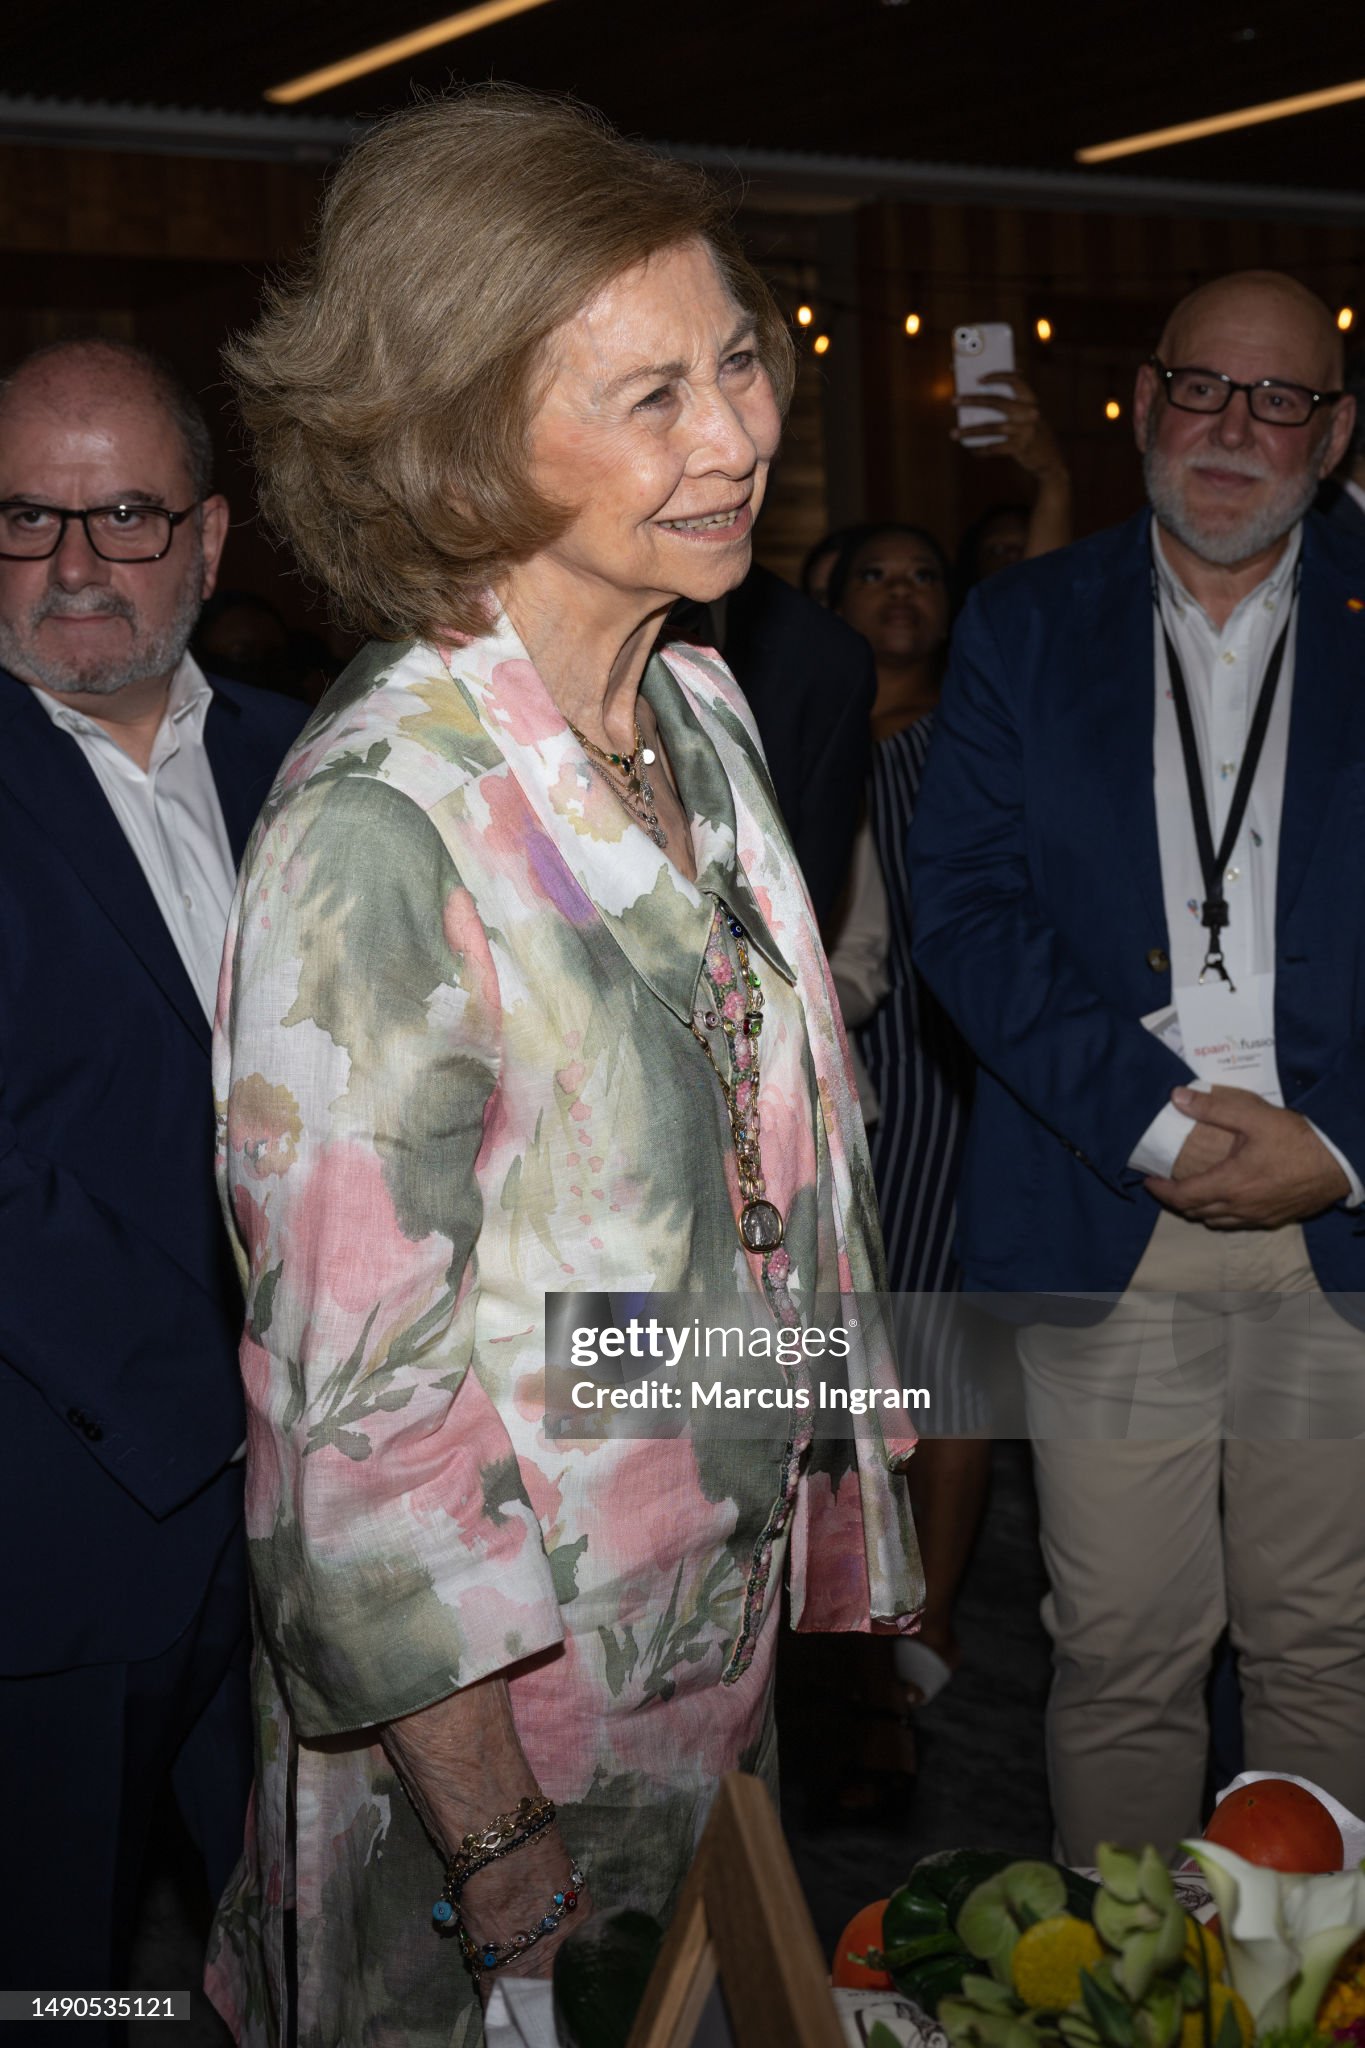 queen-sofia-of-spain-attends-spain-fusion-texas-2023-at-c-baldwin-hotel-on-may-15-2023-in.jpg